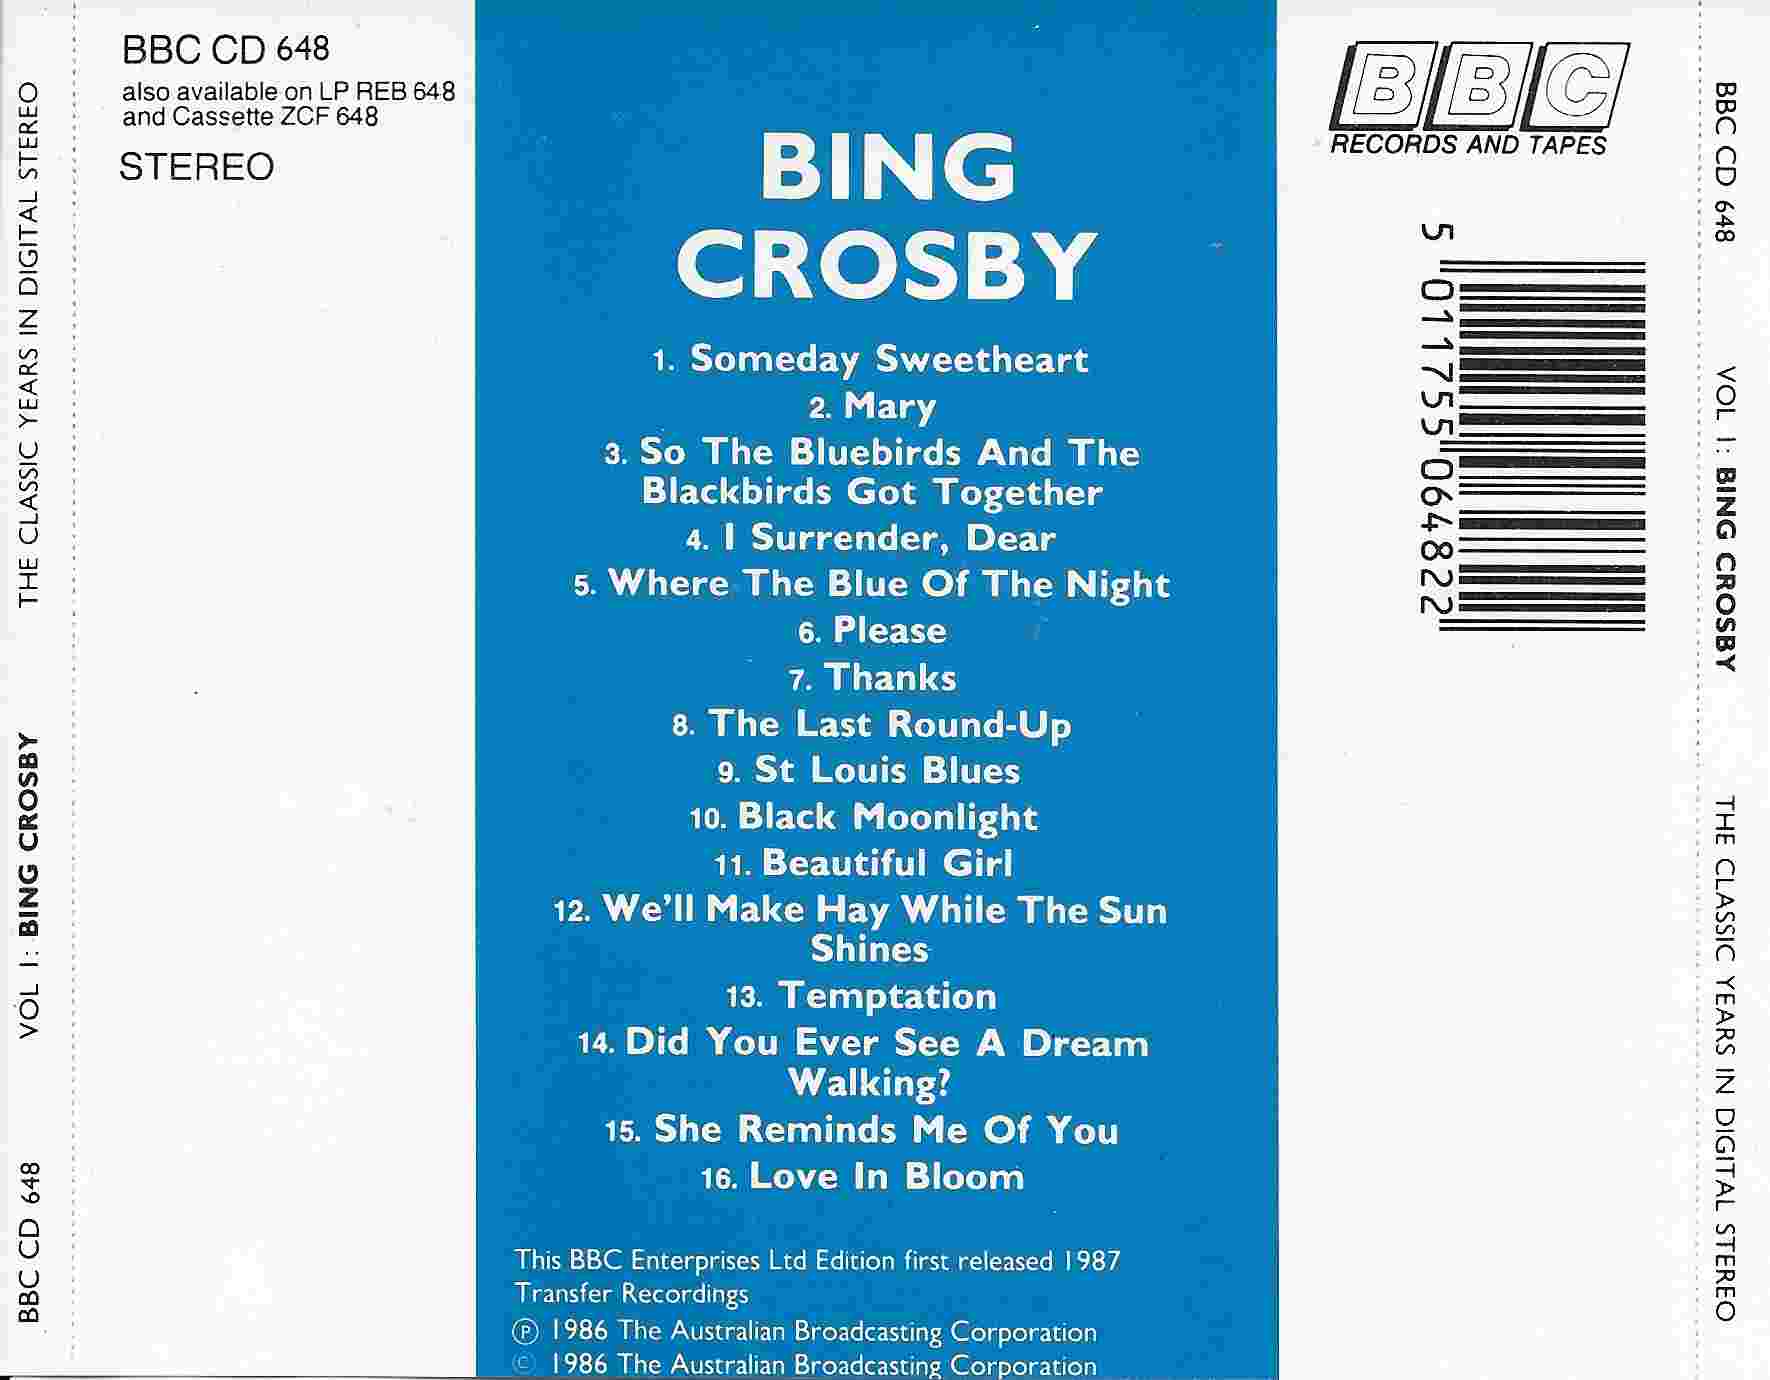 Picture of BBCCD648 Classic years - Volume 1, Bing Crosby by artist Bing Crosby from the BBC records and Tapes library